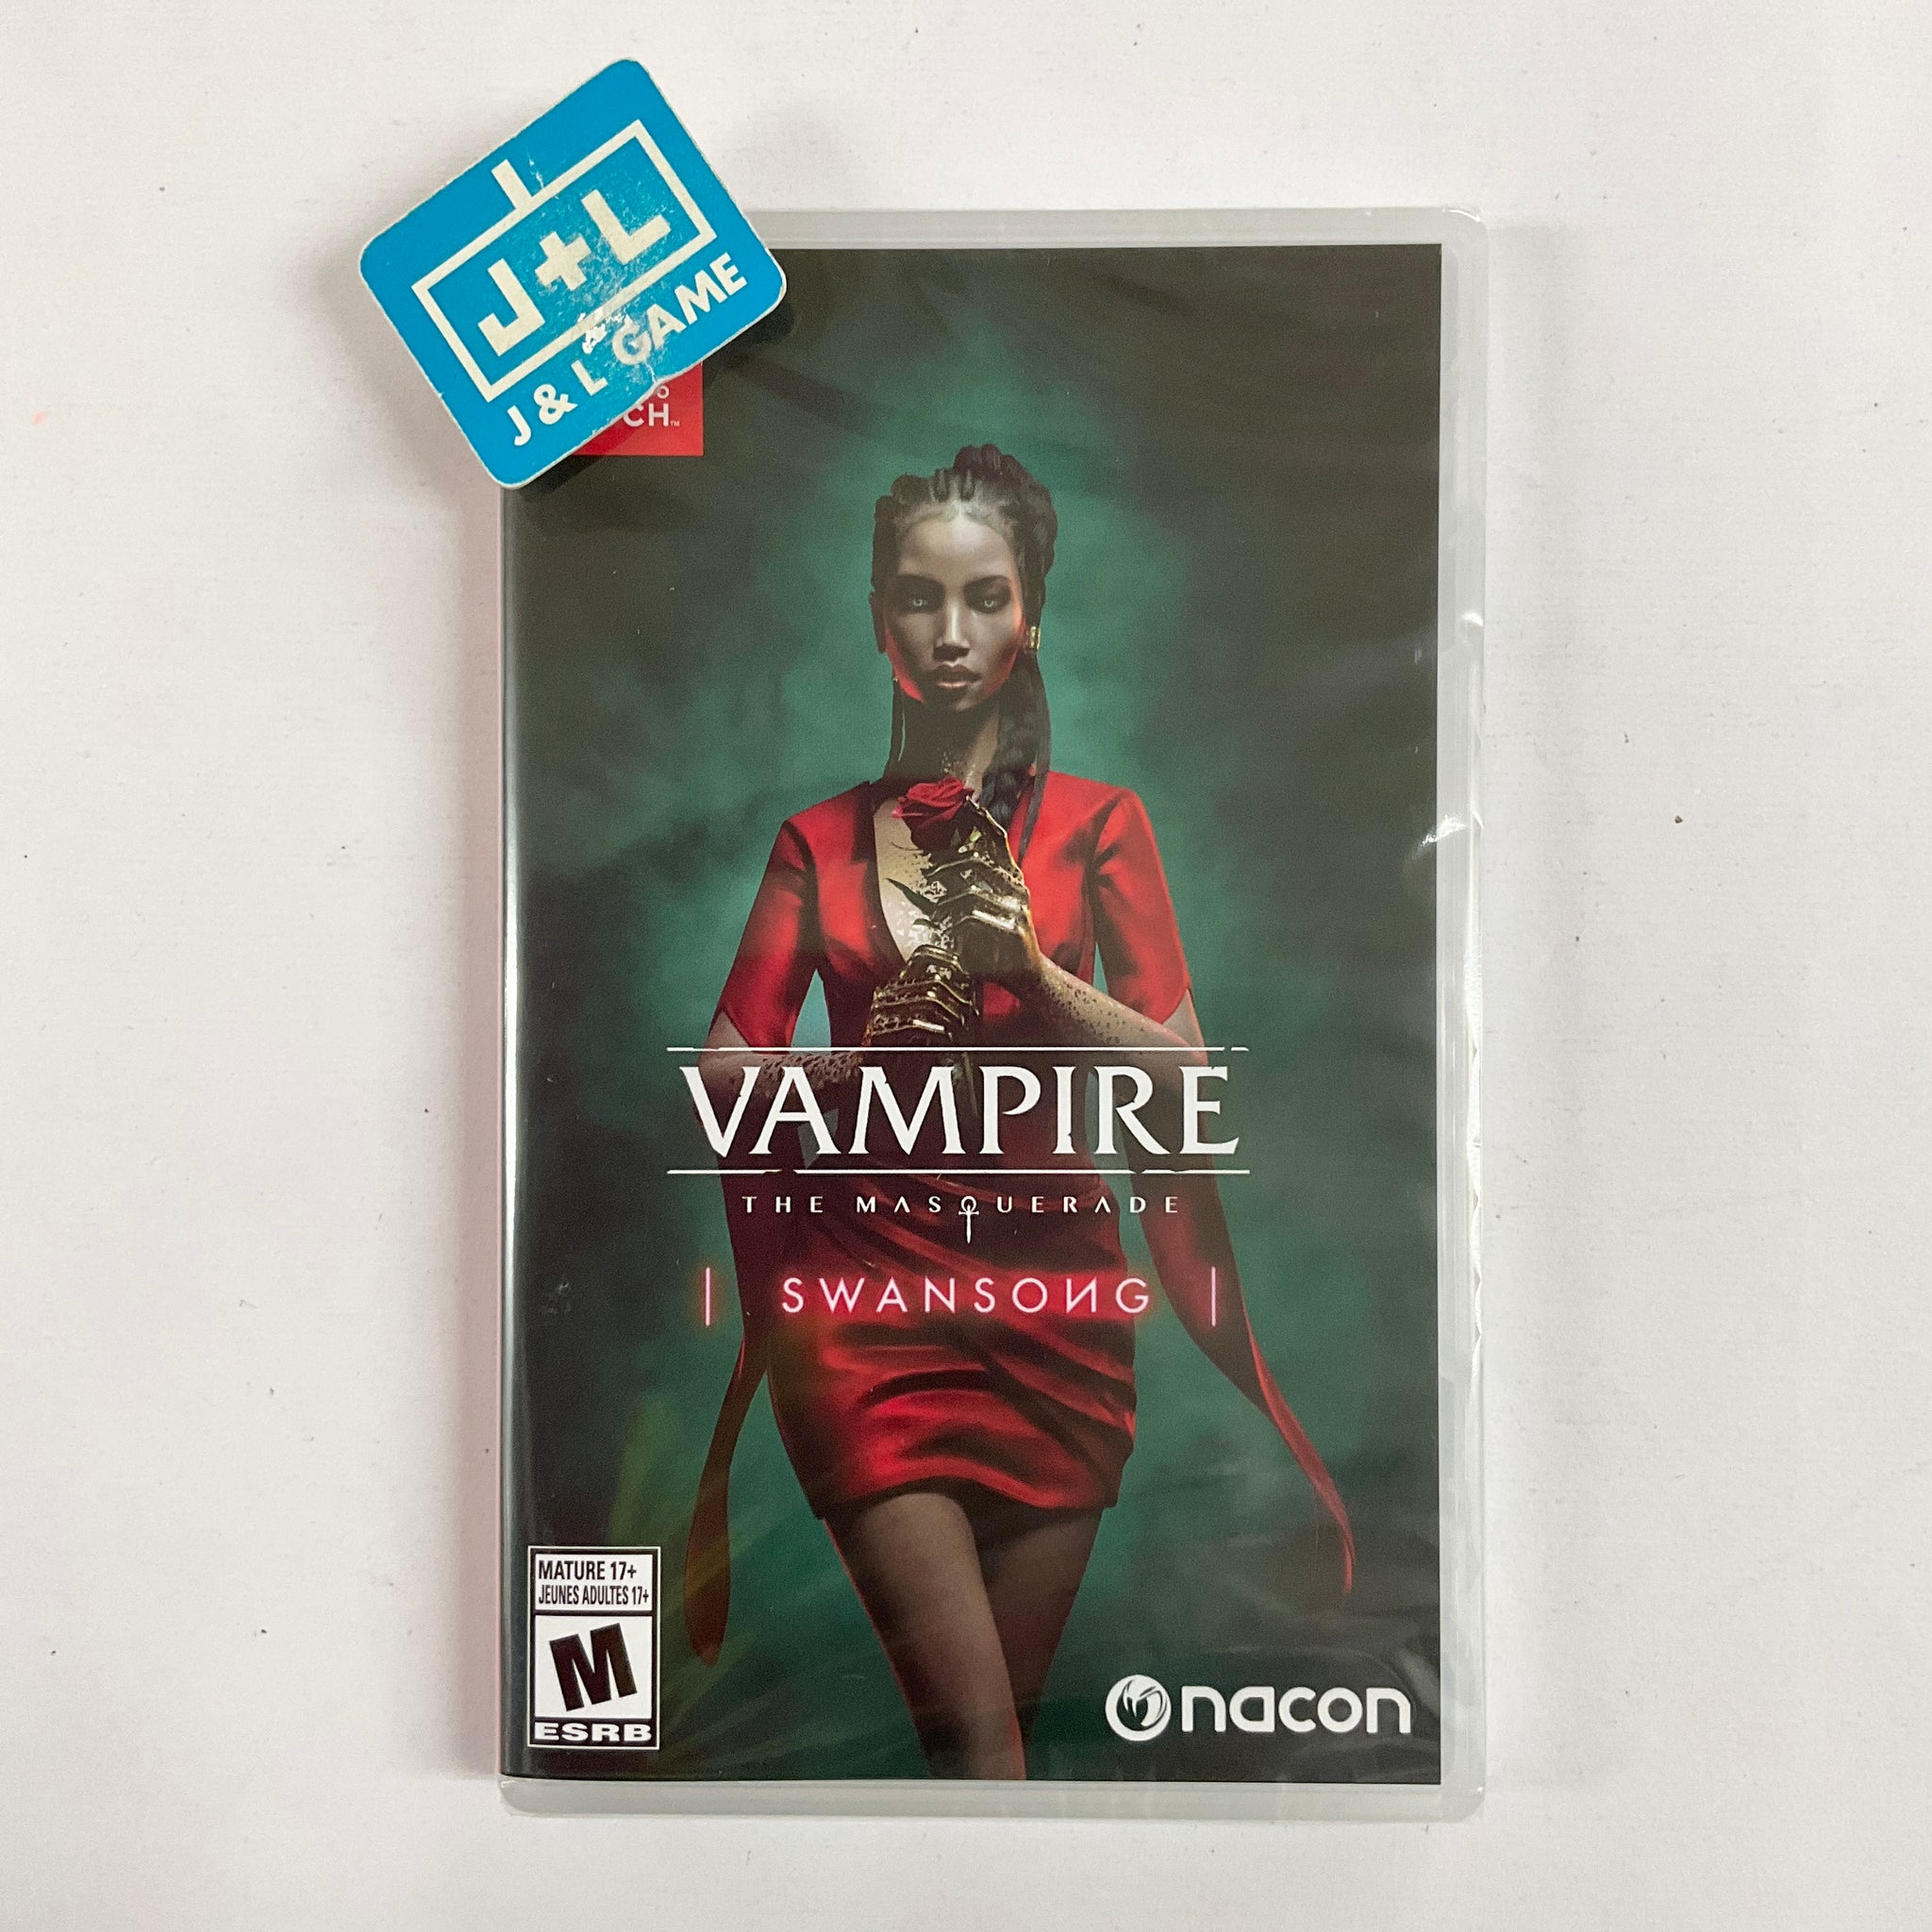 Vampire: The Masquerade CHAPTERS Unboxing 